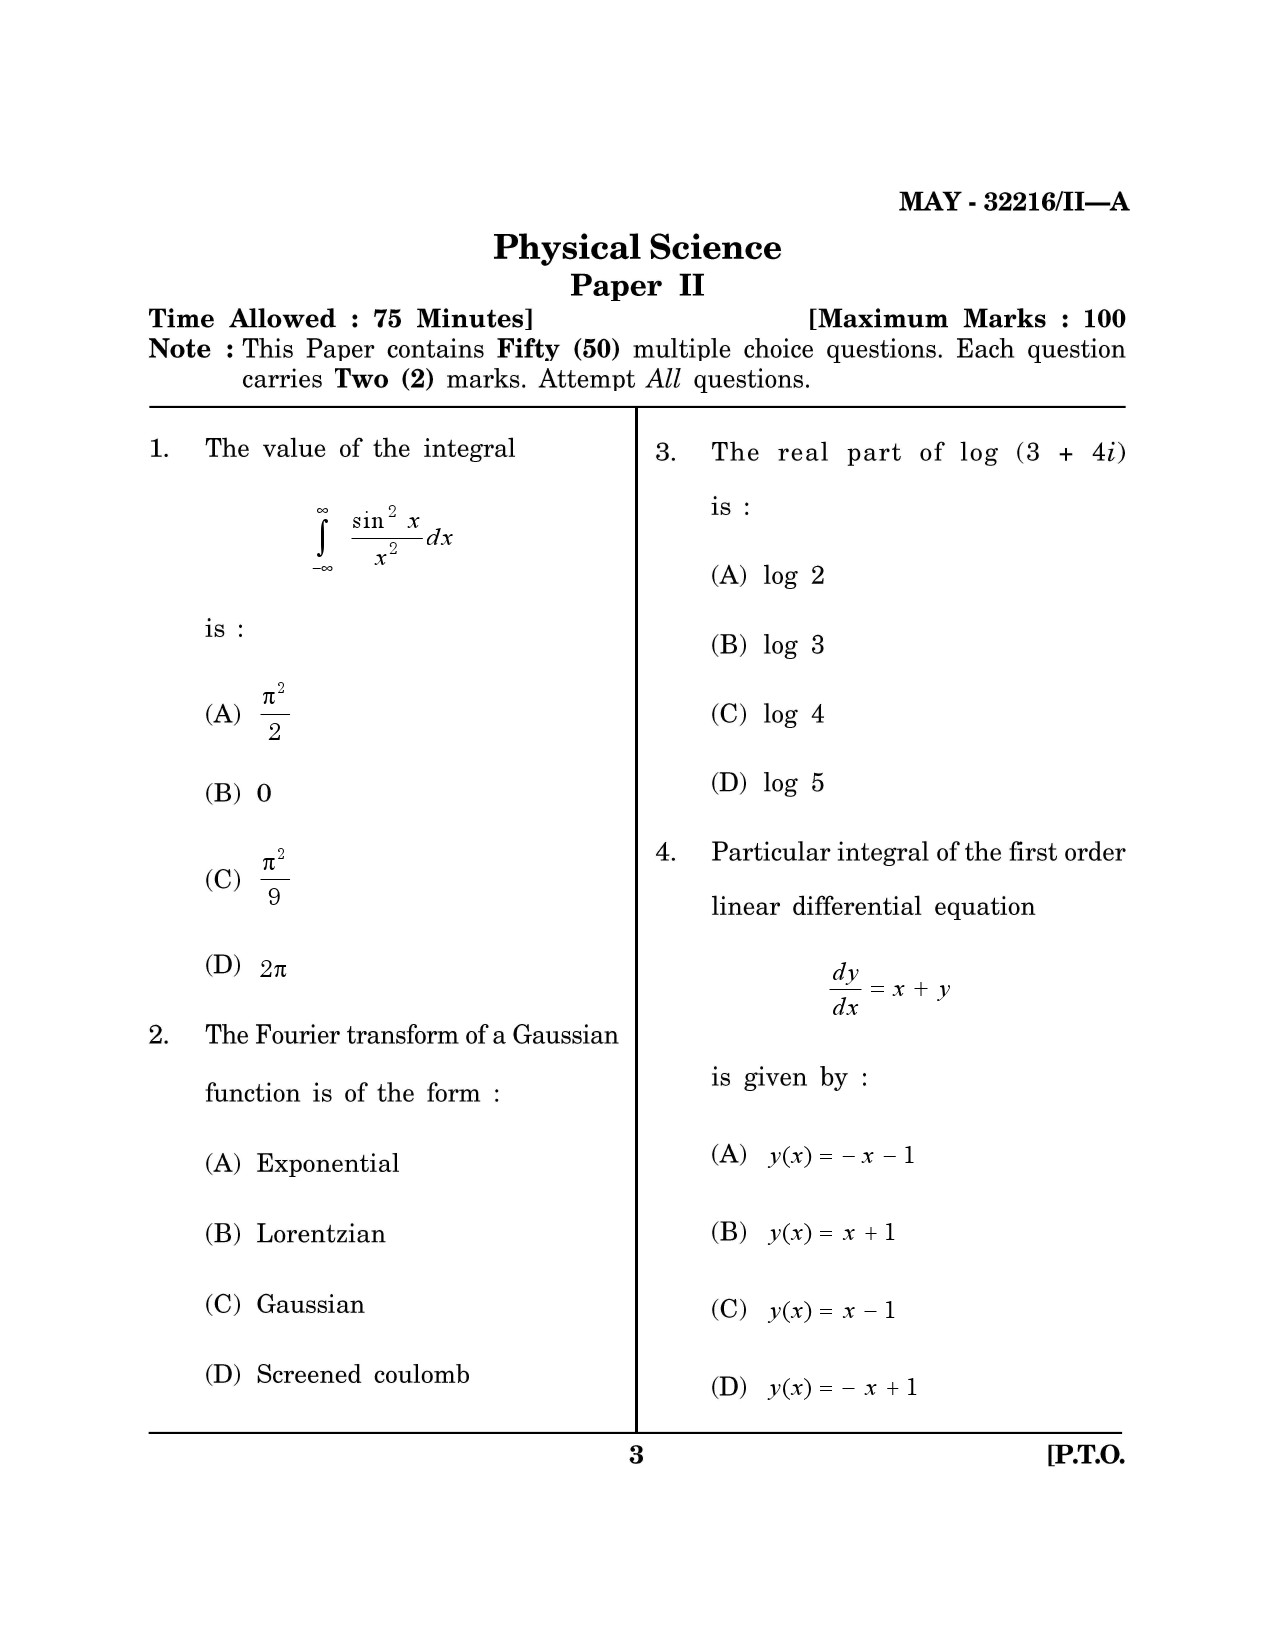 Maharashtra SET Physical Science Question Paper II May 2016 2